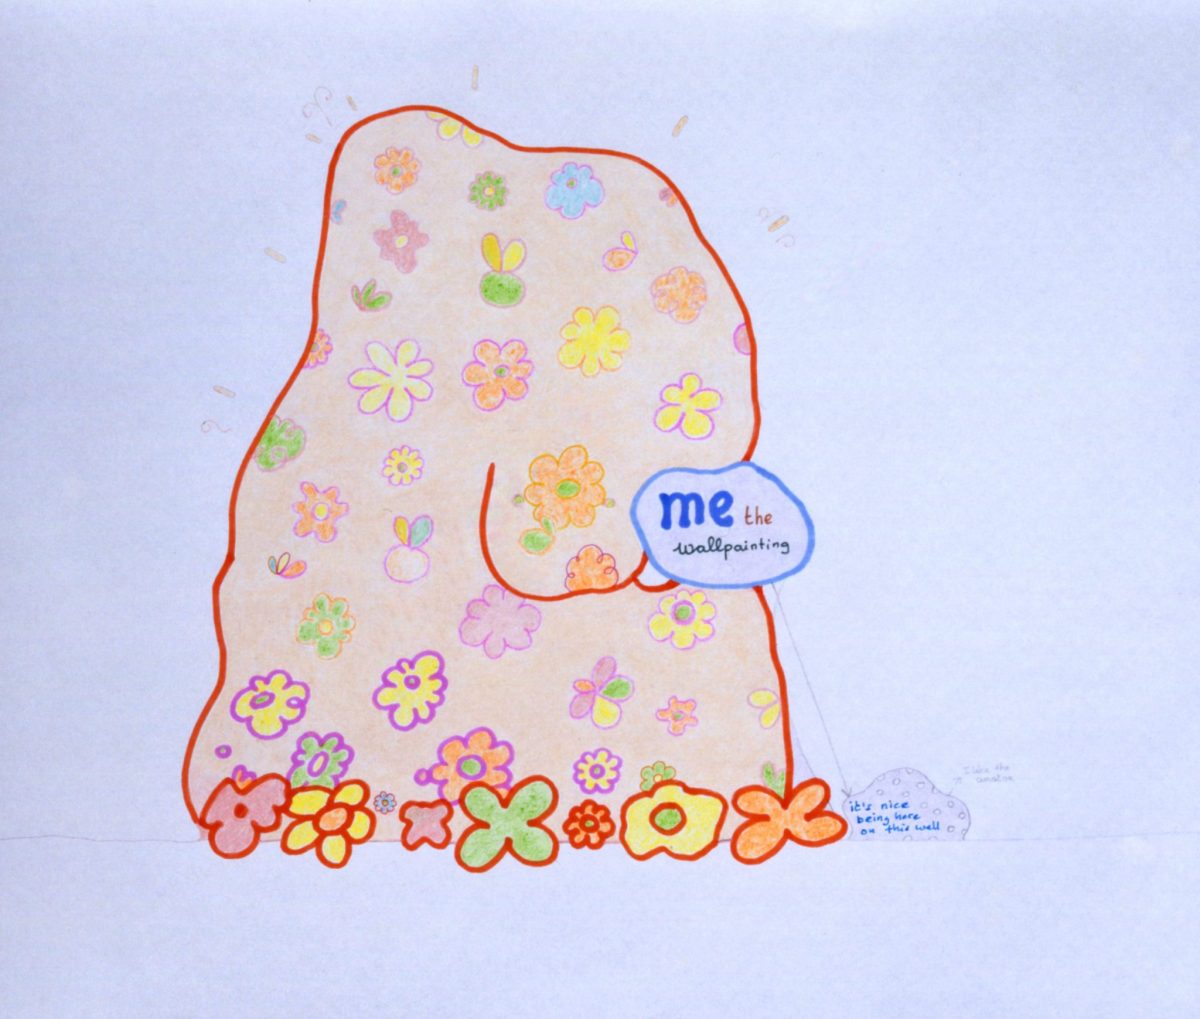 lily van der stokker, me the wall painting, 2005
design for wall painting, colored pencil, pencil, marker on paper, 26 x 28.5 cm